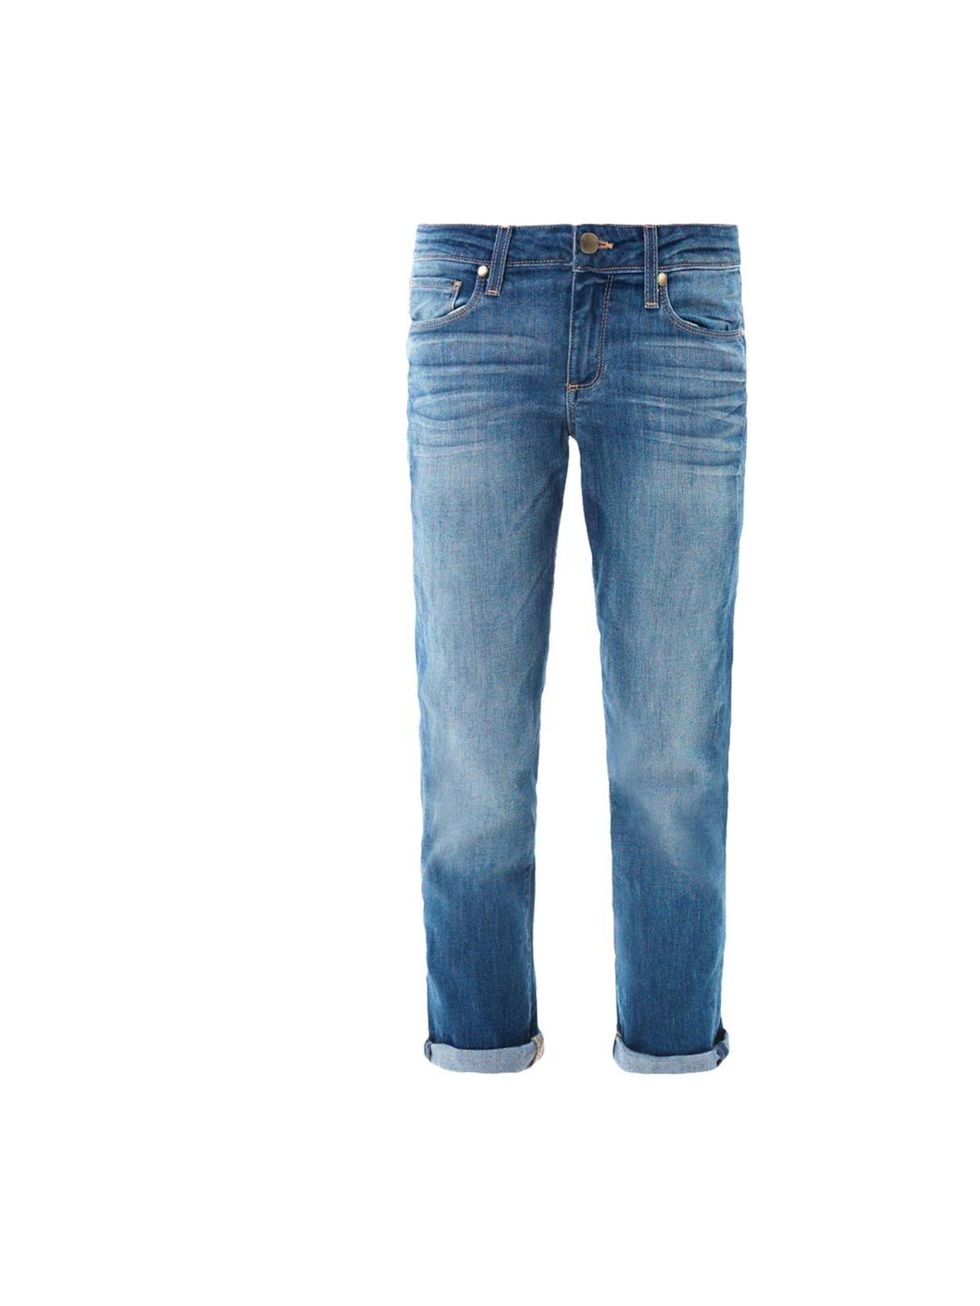 <p>Less runway, more street-style, work a cool silhouette with a pair of boyfriend jeans, Paige Denim jeans, £180, at <a href="http://www.matchesfashion.com/product/155329">Matches Fashion</a></p>